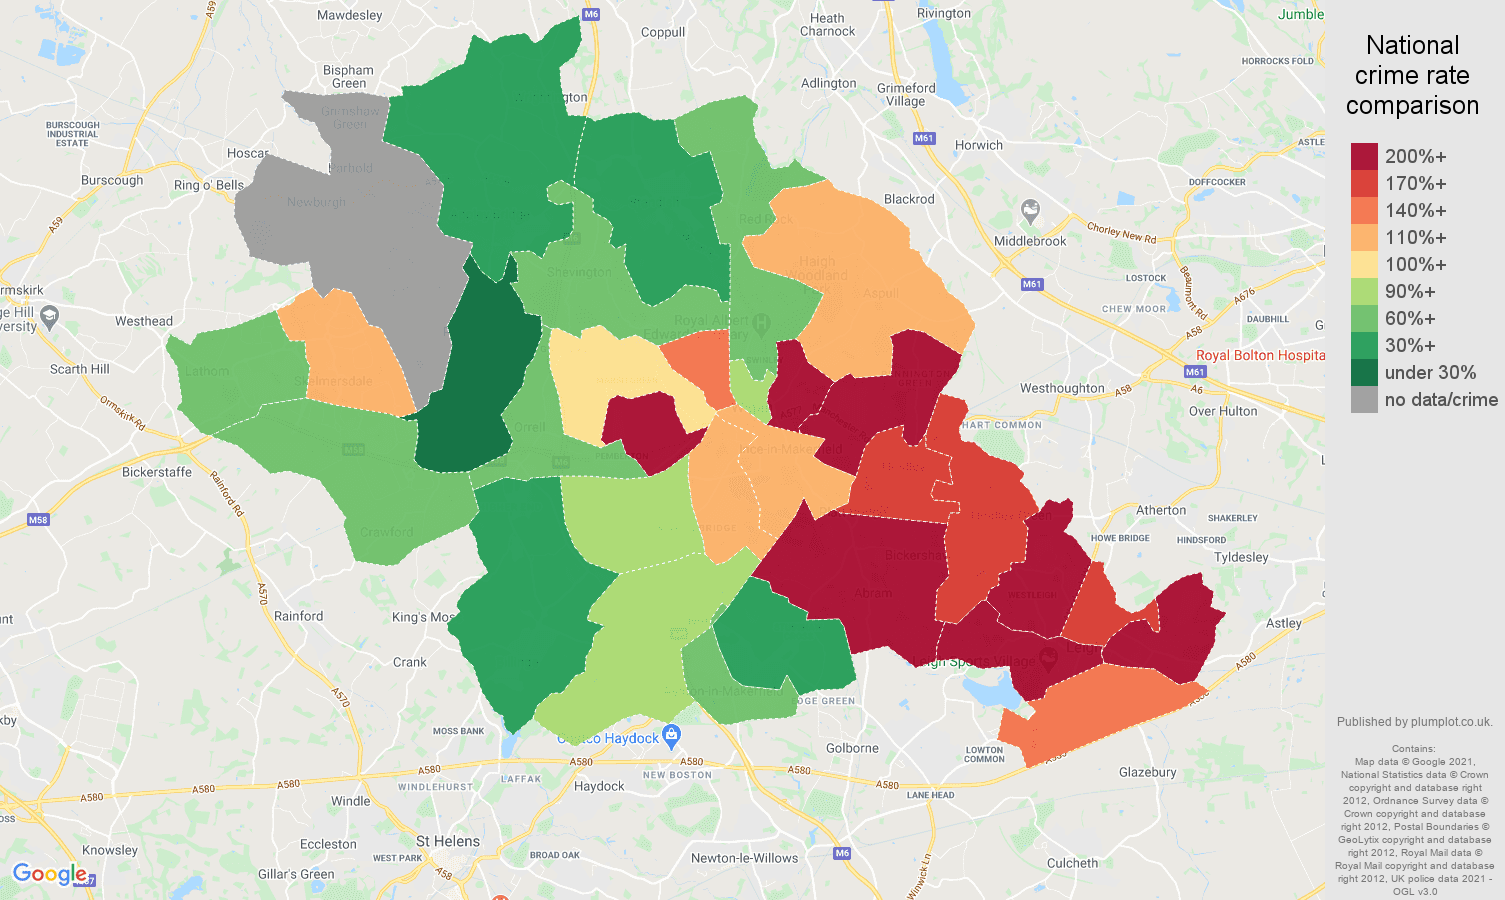 Wigan other crime rate comparison map